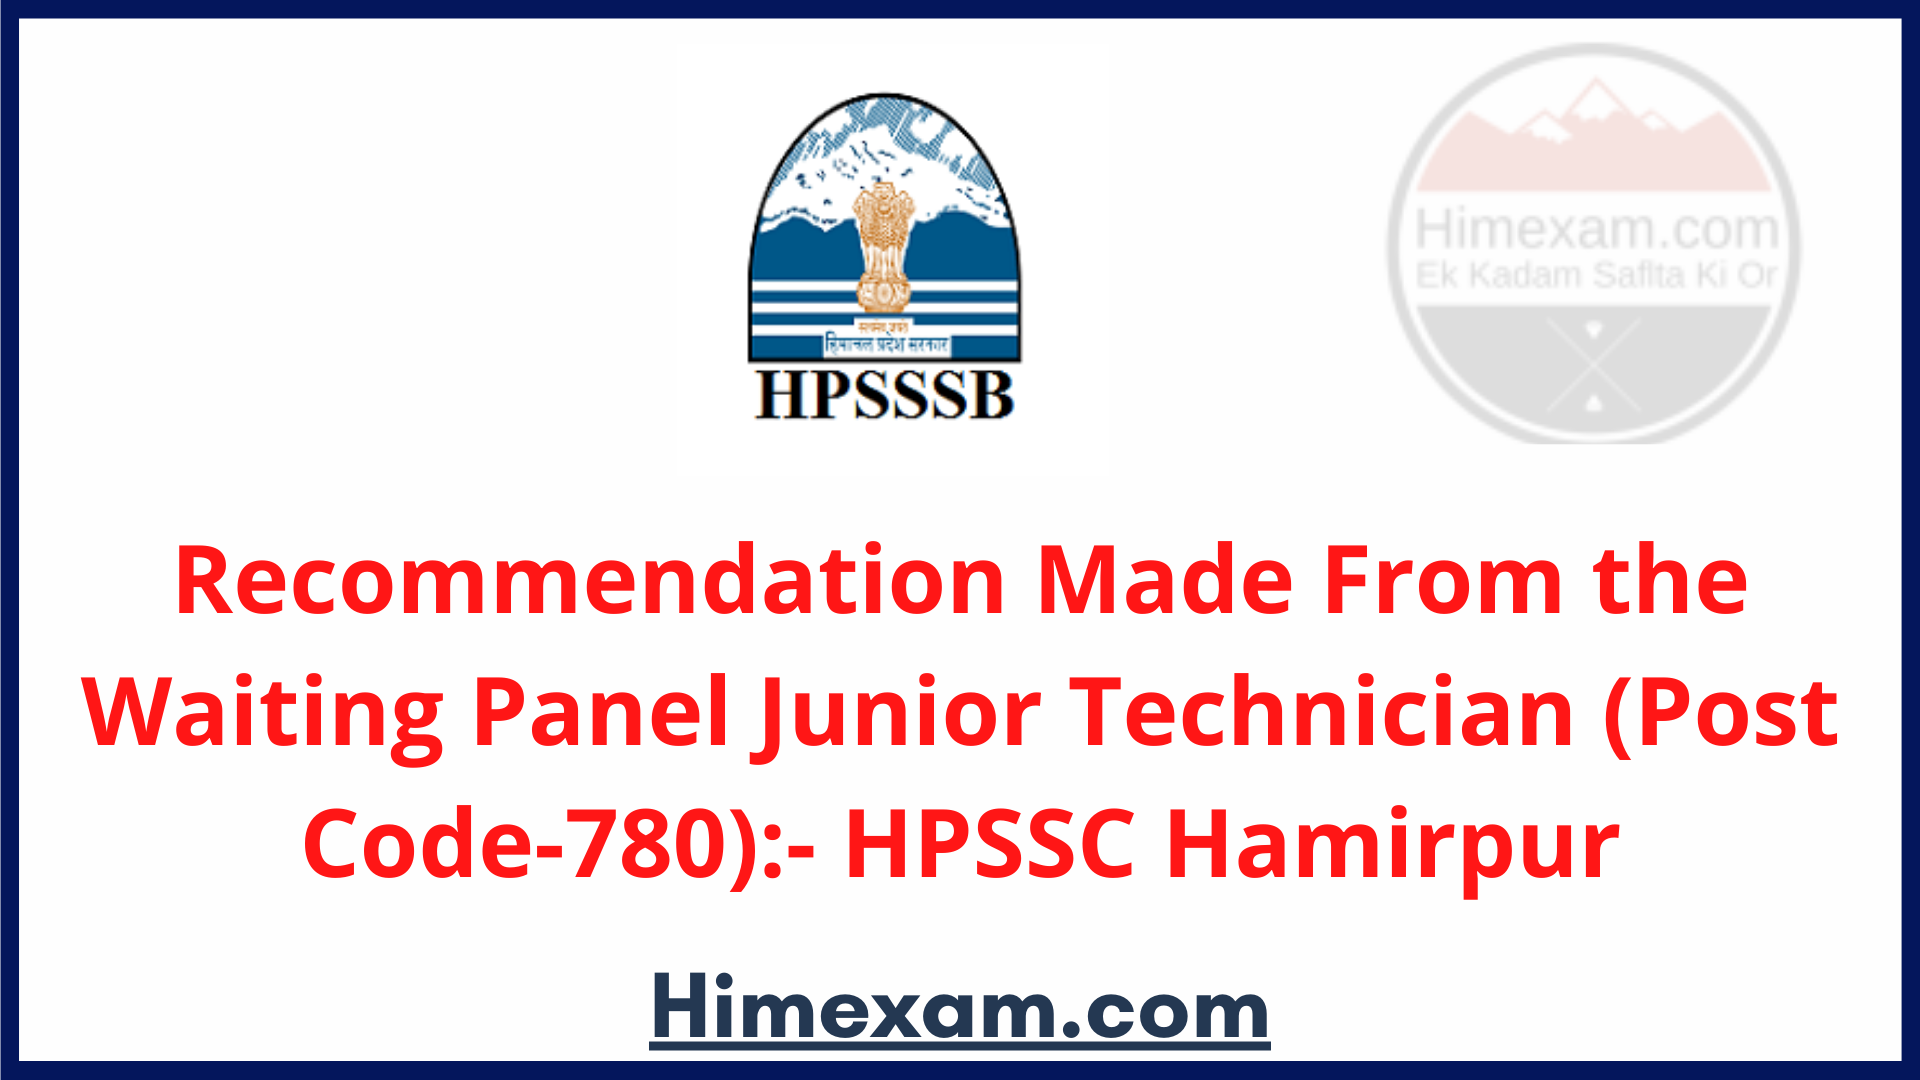 Recommendation Made From the Waiting Panel Junior Technician (Post Code-780):- HPSSC Hamirpur